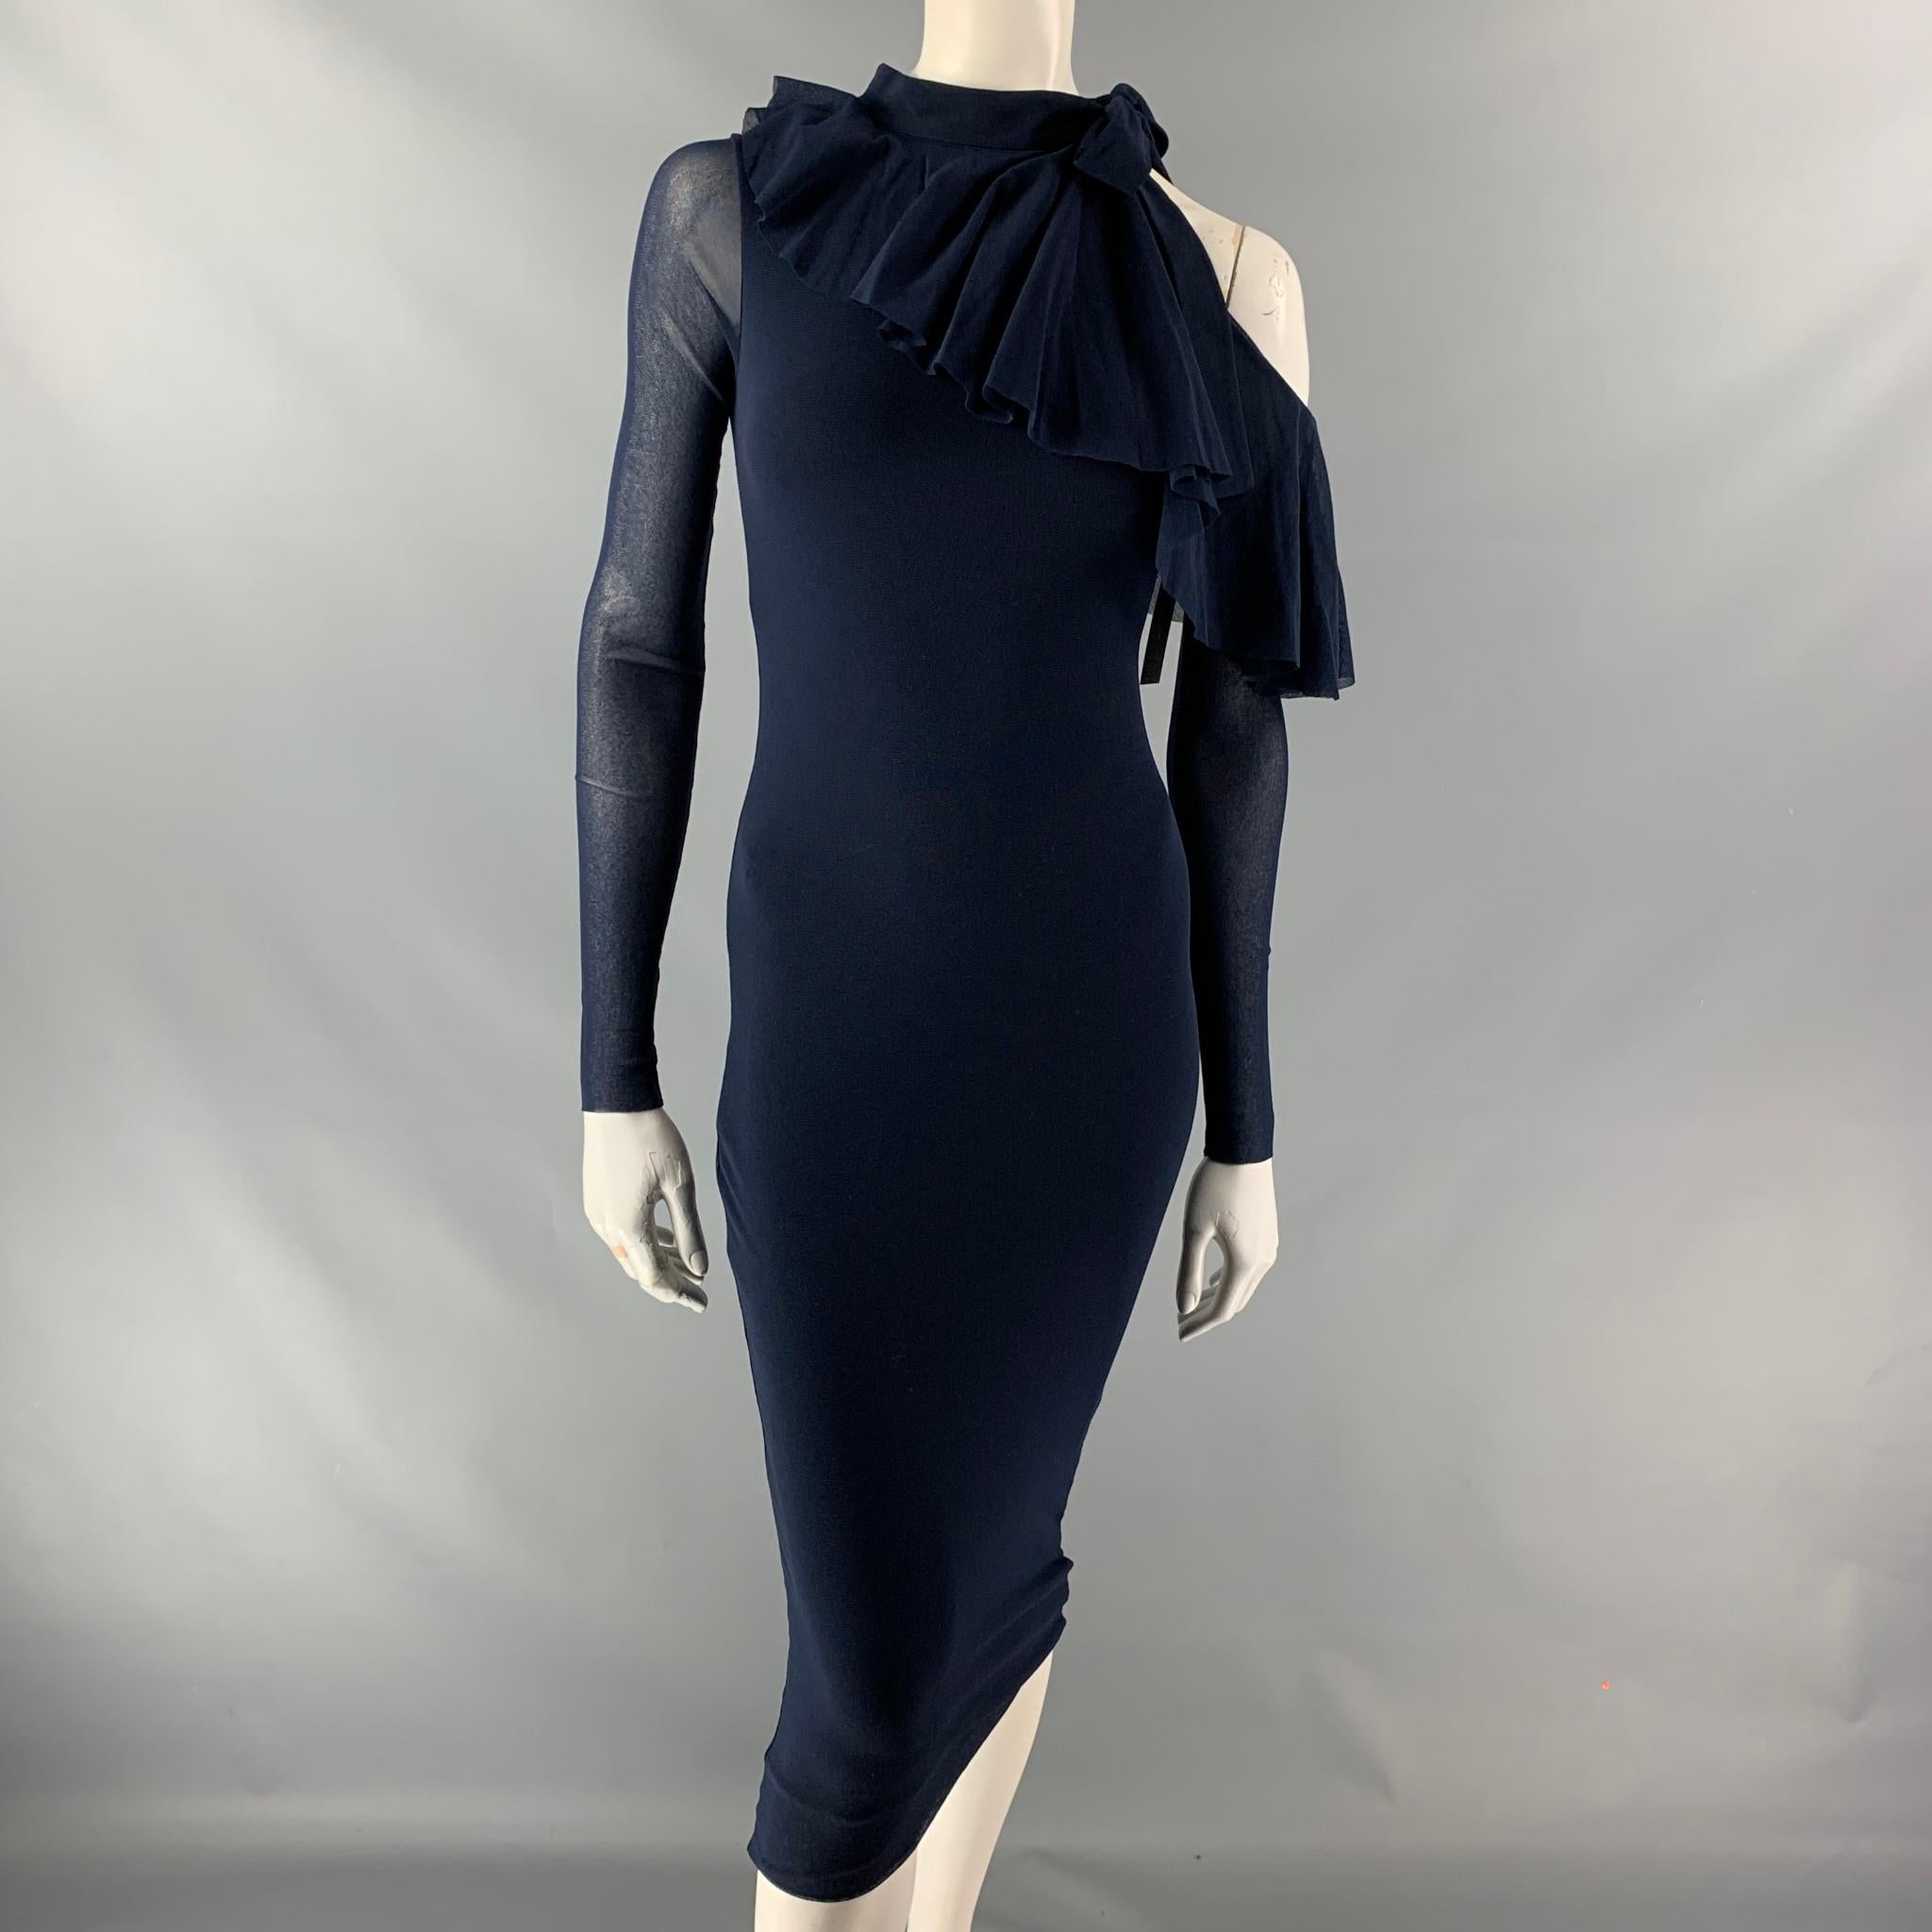 FUZZI asymmetric long sleeve dress comes in navy polyamide featuring an asymmetric ruffled detail at left sleeve. Made in Italy.

New With Tags.
Marked: XS.

Measurements:

Bust: 28 in
Waist: 26 in
Hip: 28 in
Length: 44 in

 